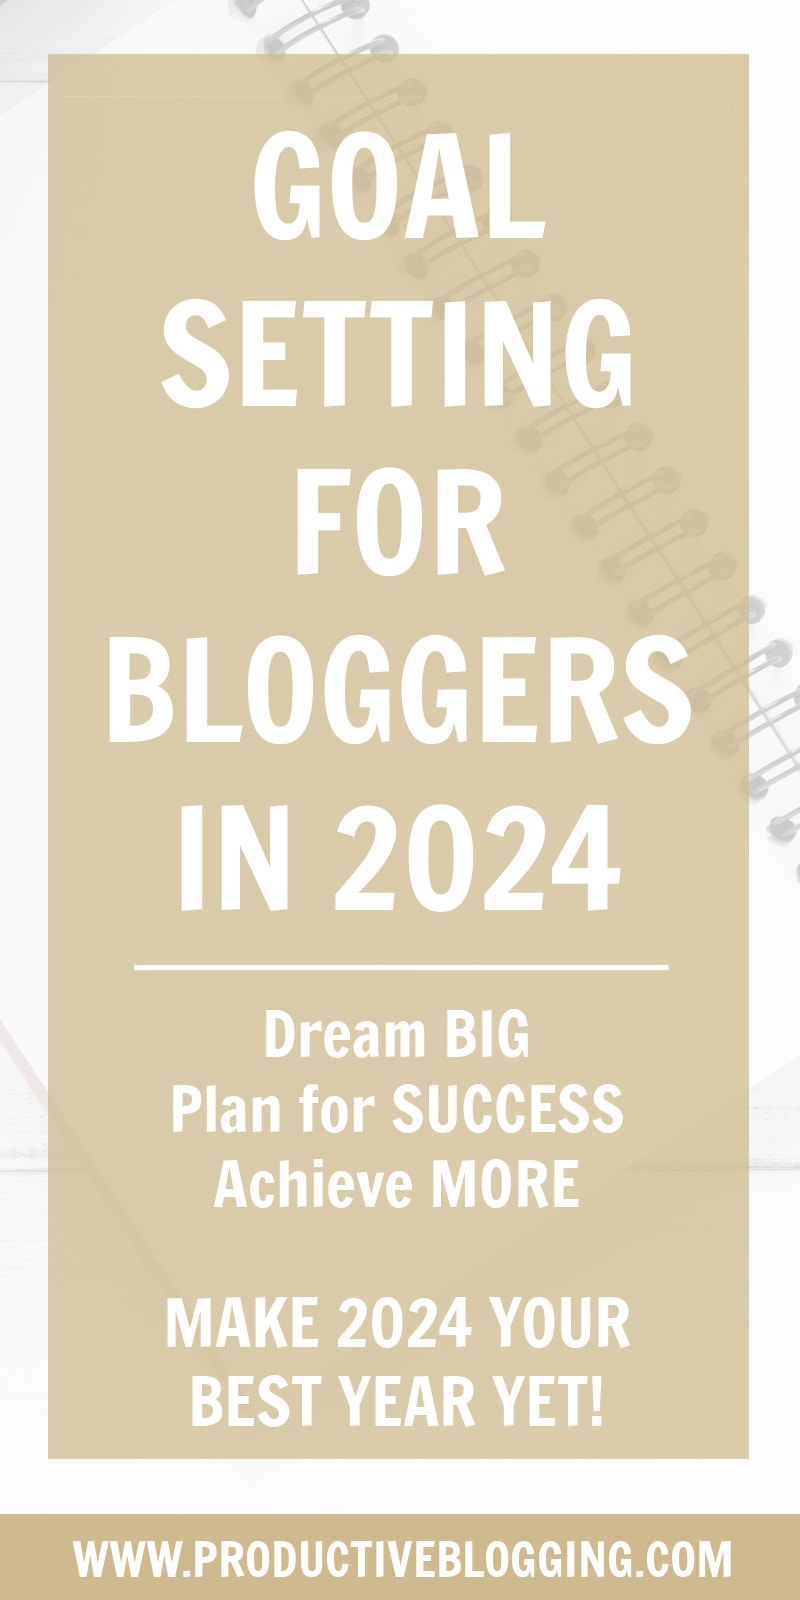 Want to have your best year ever in 2024? Don't leave it to chance. Read my guide to goal setting for bloggers in 2024, dream big and achieve those dreams! #goals #dreams #2024 #2024goals #goalsetting #goalsetting2024 #2024dreams #newyear #newyears2024 #newyearplanning #newyeargoals #2024planning #2024planner #2024plans #blogginggoals #bloggingdreams #blogplanner #blogplanning #blogplanning2024 #blogplanner2024